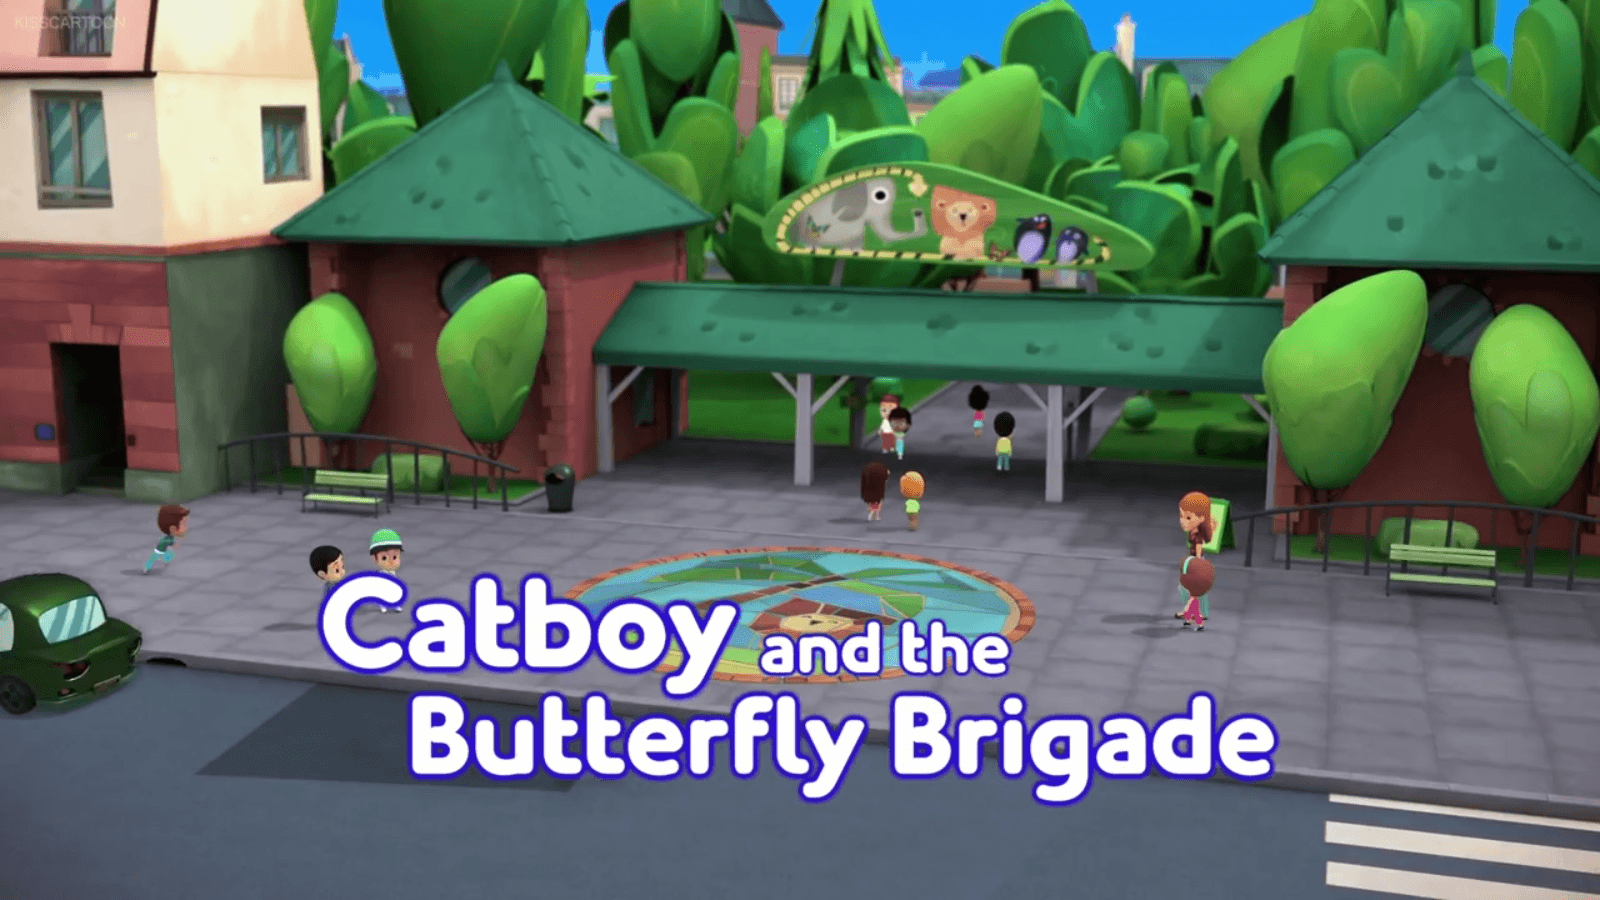 Catboy and the Butterfly Brigade. PJ Masks Wiki powered